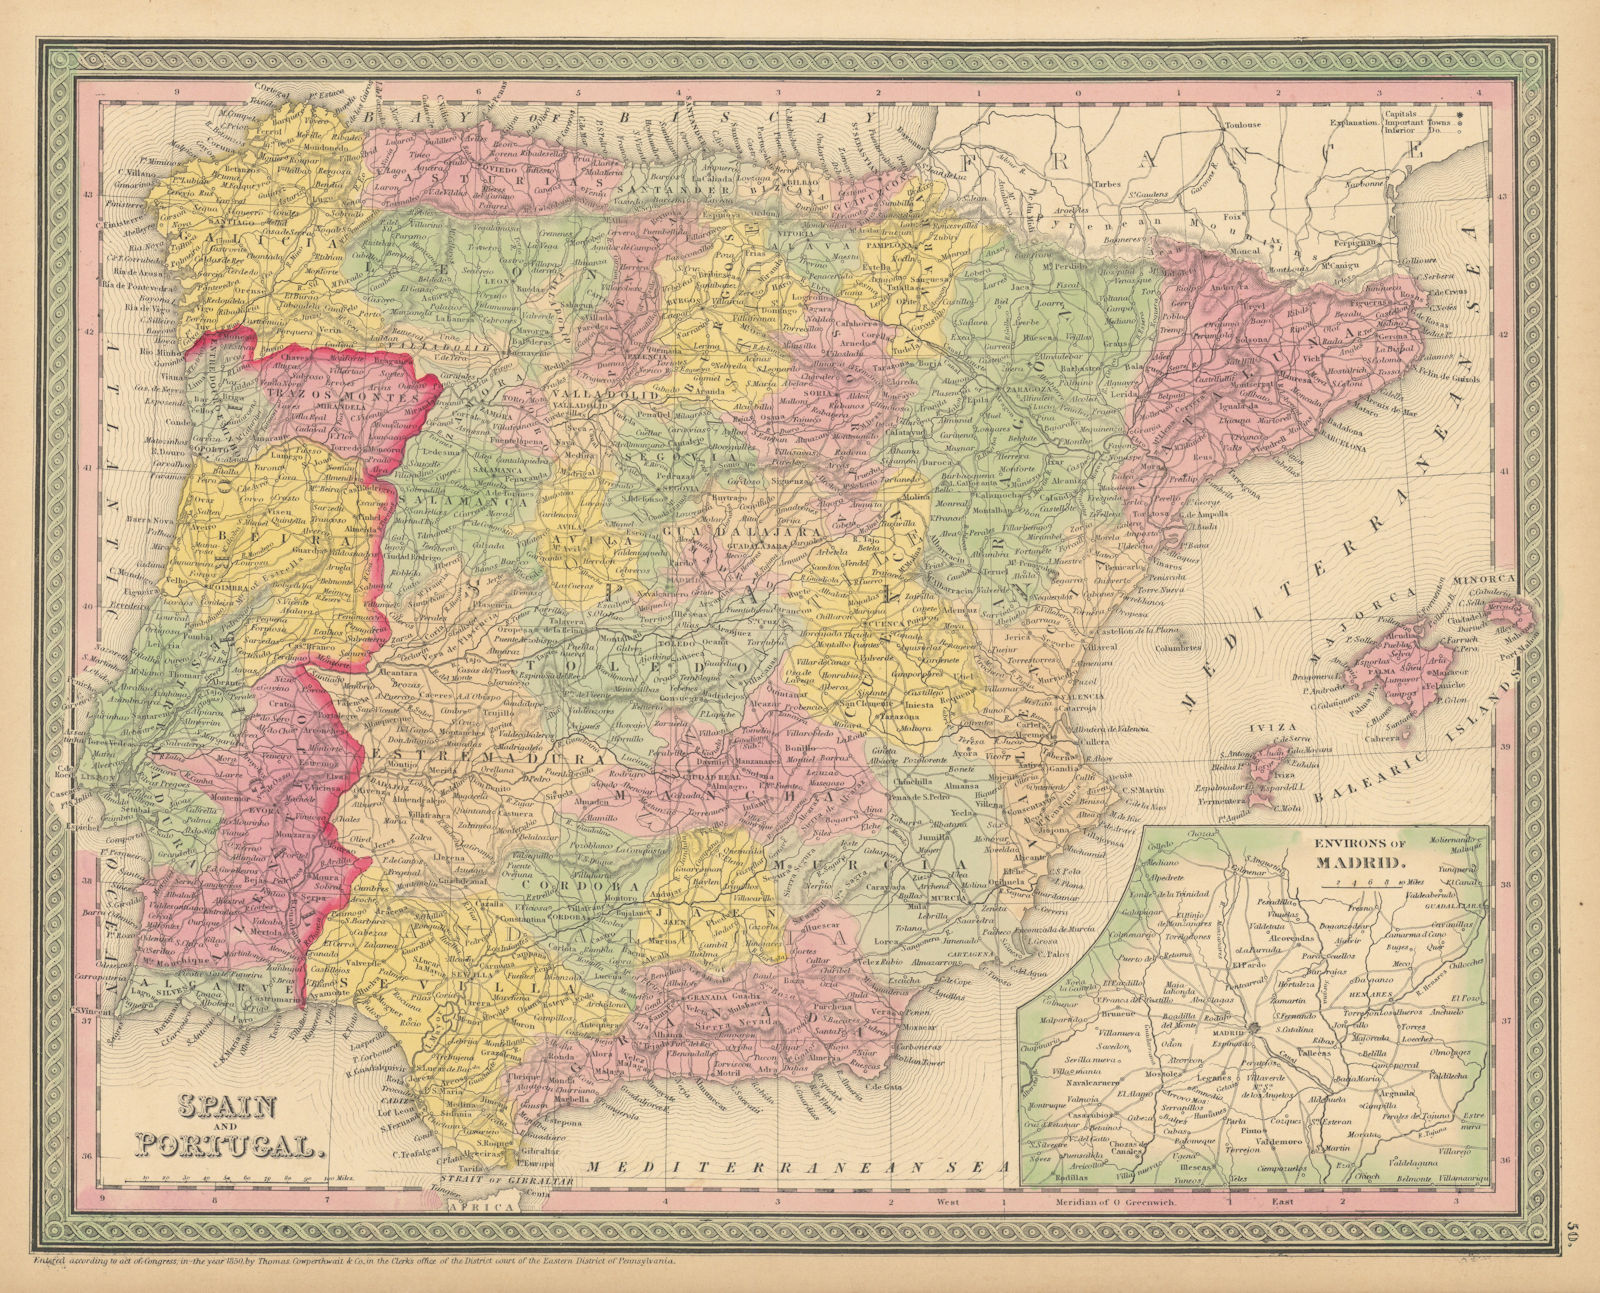 Associate Product Spain and Portugal. Iberia. THOMAS, COWPERTHWAIT 1852 old antique map chart